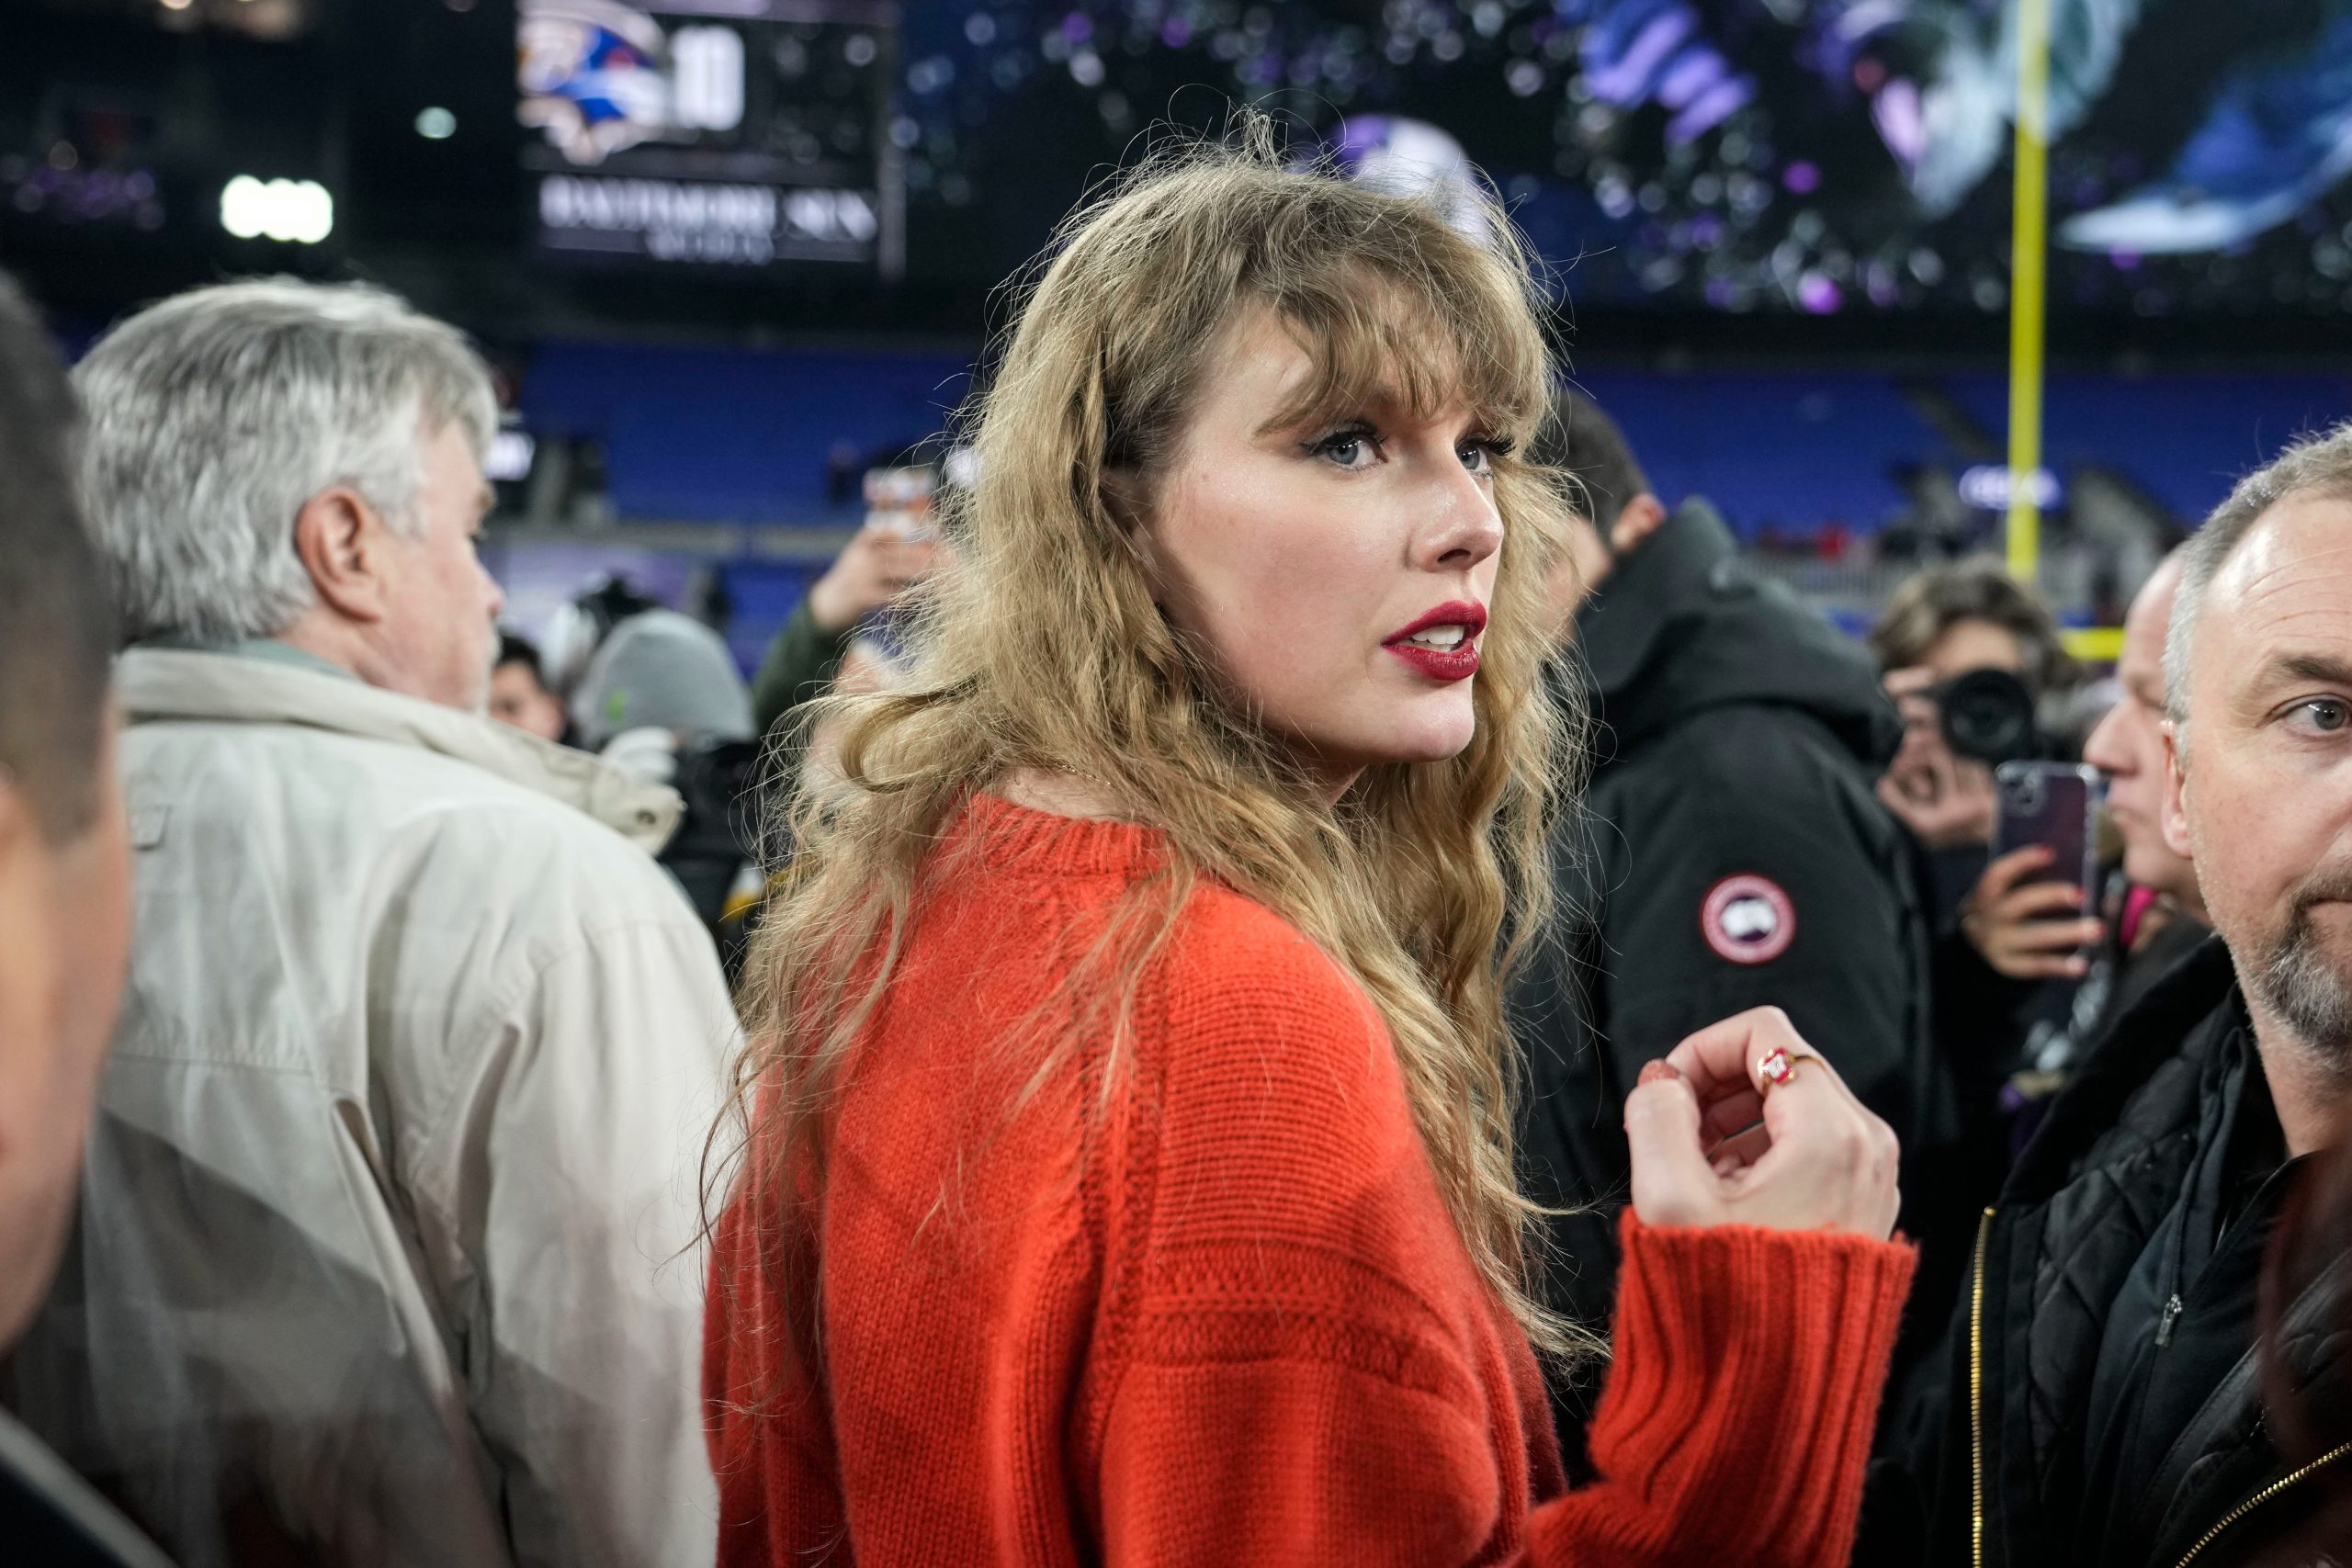 The Maga World is on the Brink of Encountering Taylor Swift's Fandom. it is Anticipated Not to go Well